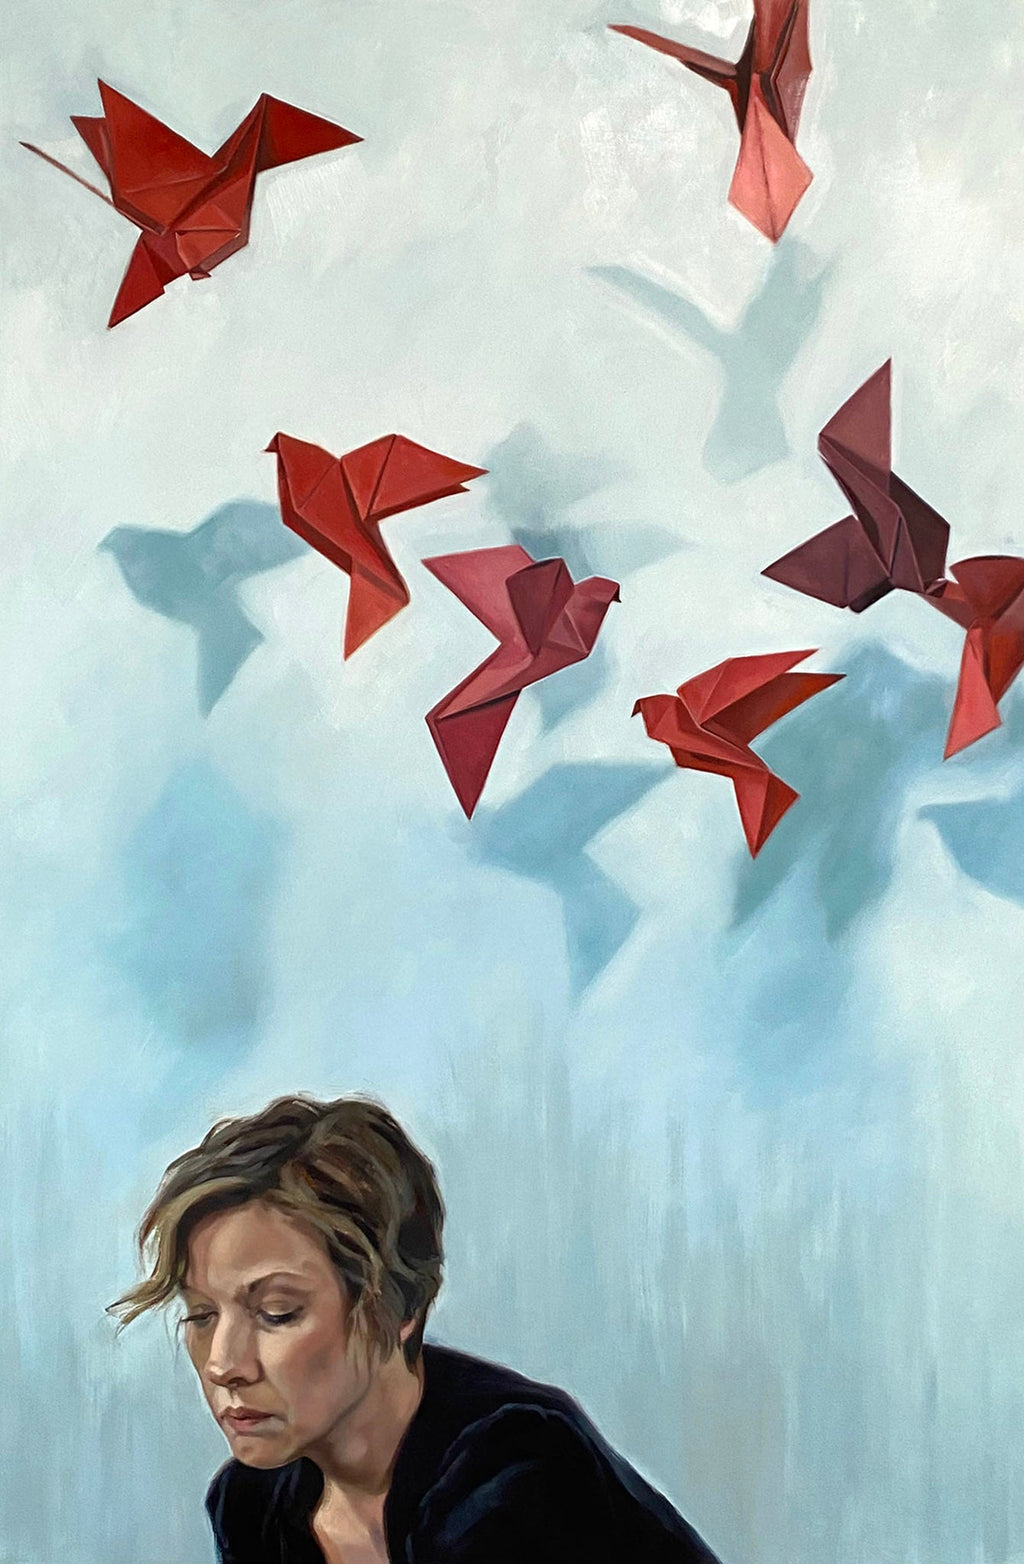 Oil painting of woman thinking and red paper cranes floating above. 24"x36" (25"x37" framed) oil on panel by April Dawes